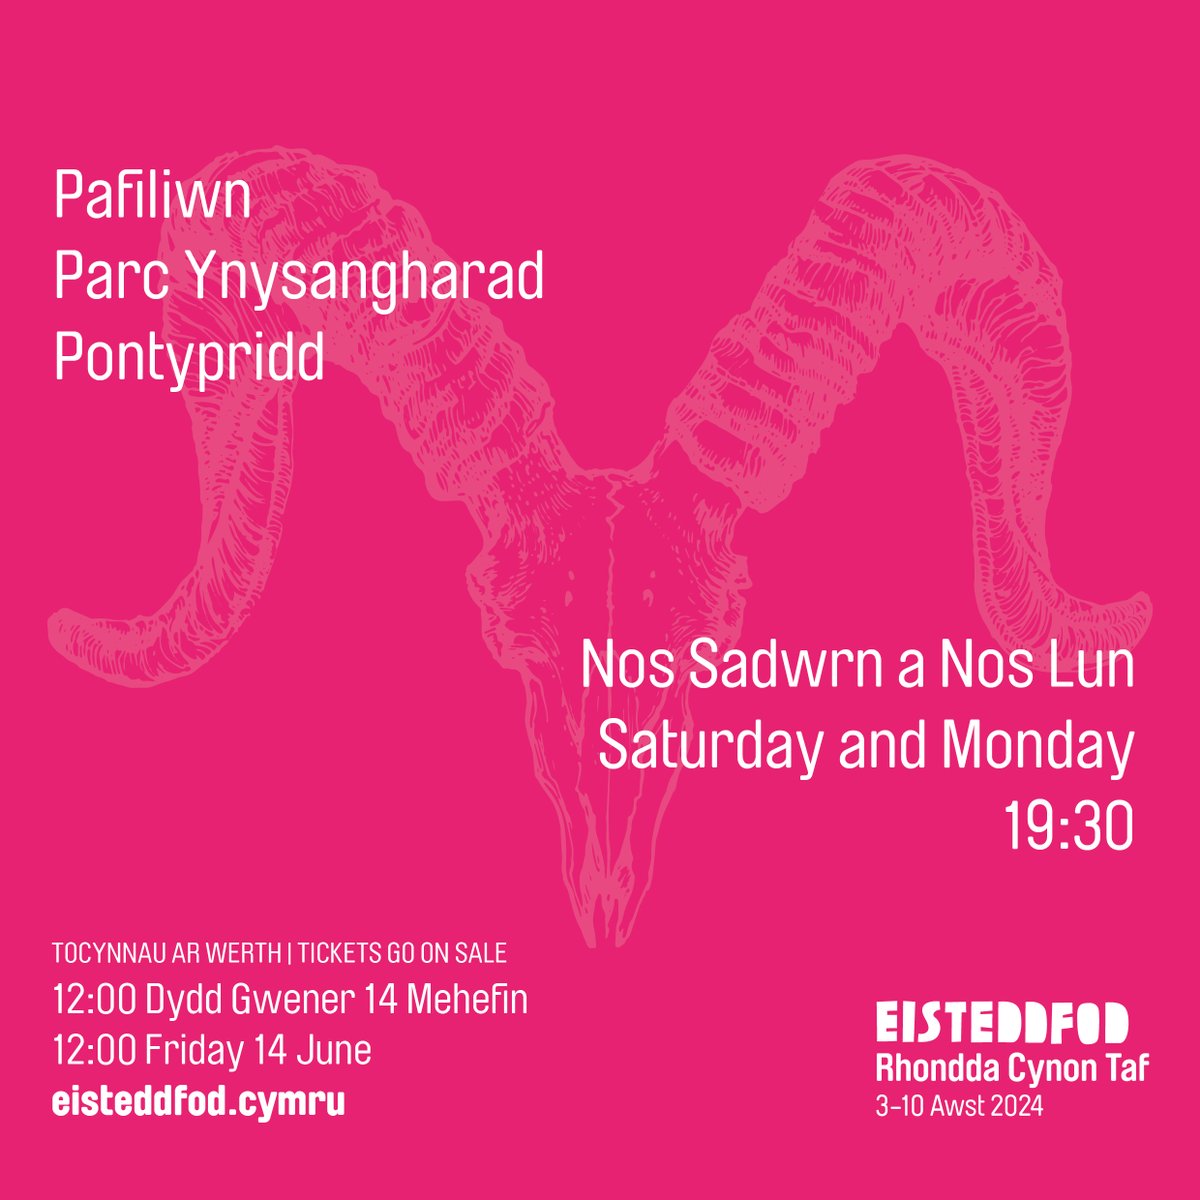 ✍️ Put the date in your calendar. ⚠️ 12:00 Friday 14 June - Nia Ben Aur Show tickets go on sale on the Eisteddfod website 🎟️ The show will be on the Pafiliwn stage Saturday 3 August and Monday 5 August - 19:30 at Parc Ynysangharad Pontypridd.